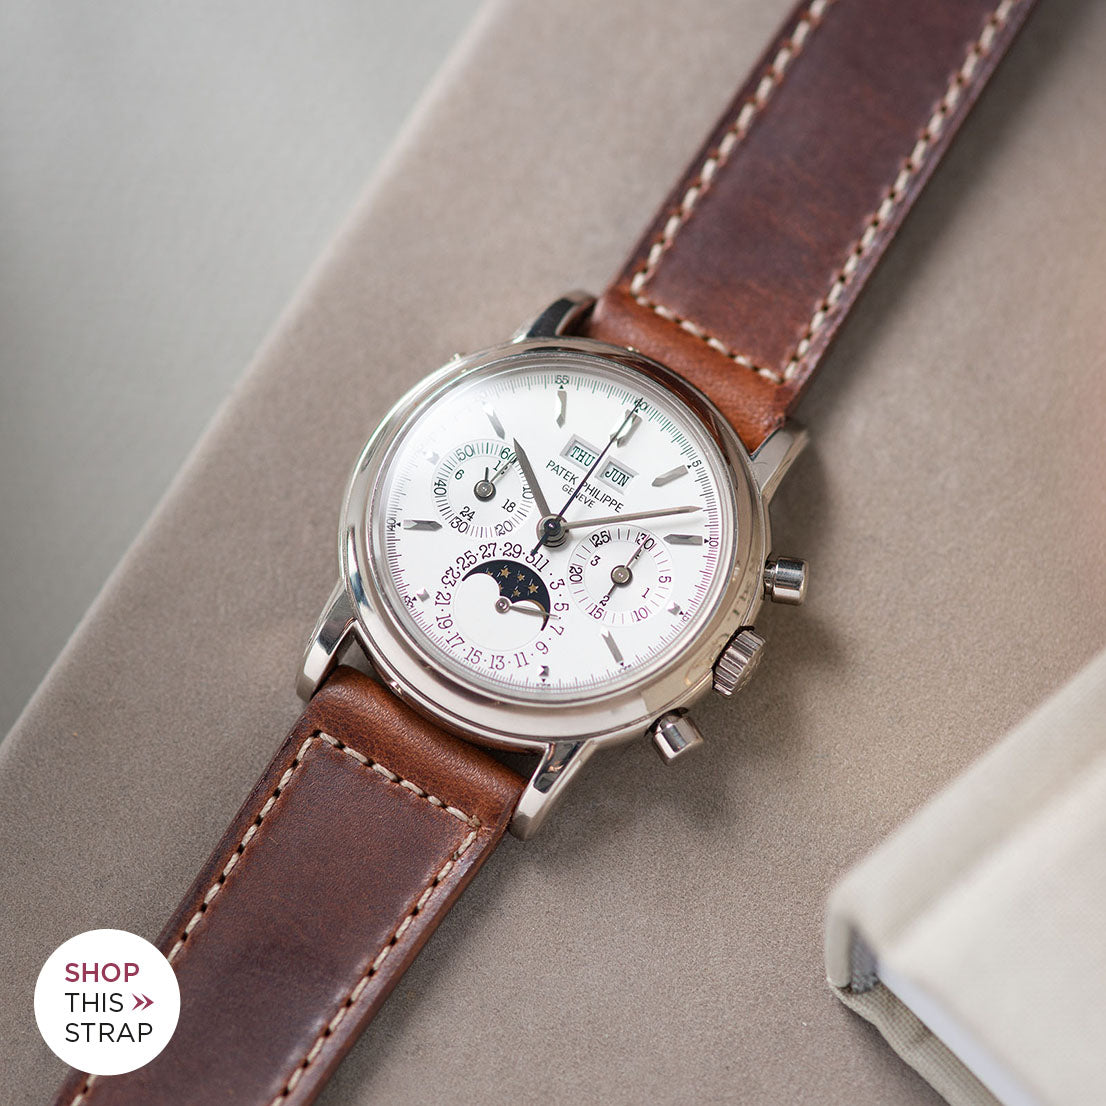 Bulang and Sons_Strap Guide_The Patek Philippe 3970 G White Gold Perpetual Calendar_Siena Brown Boxed Stitch Leather Watch Strap